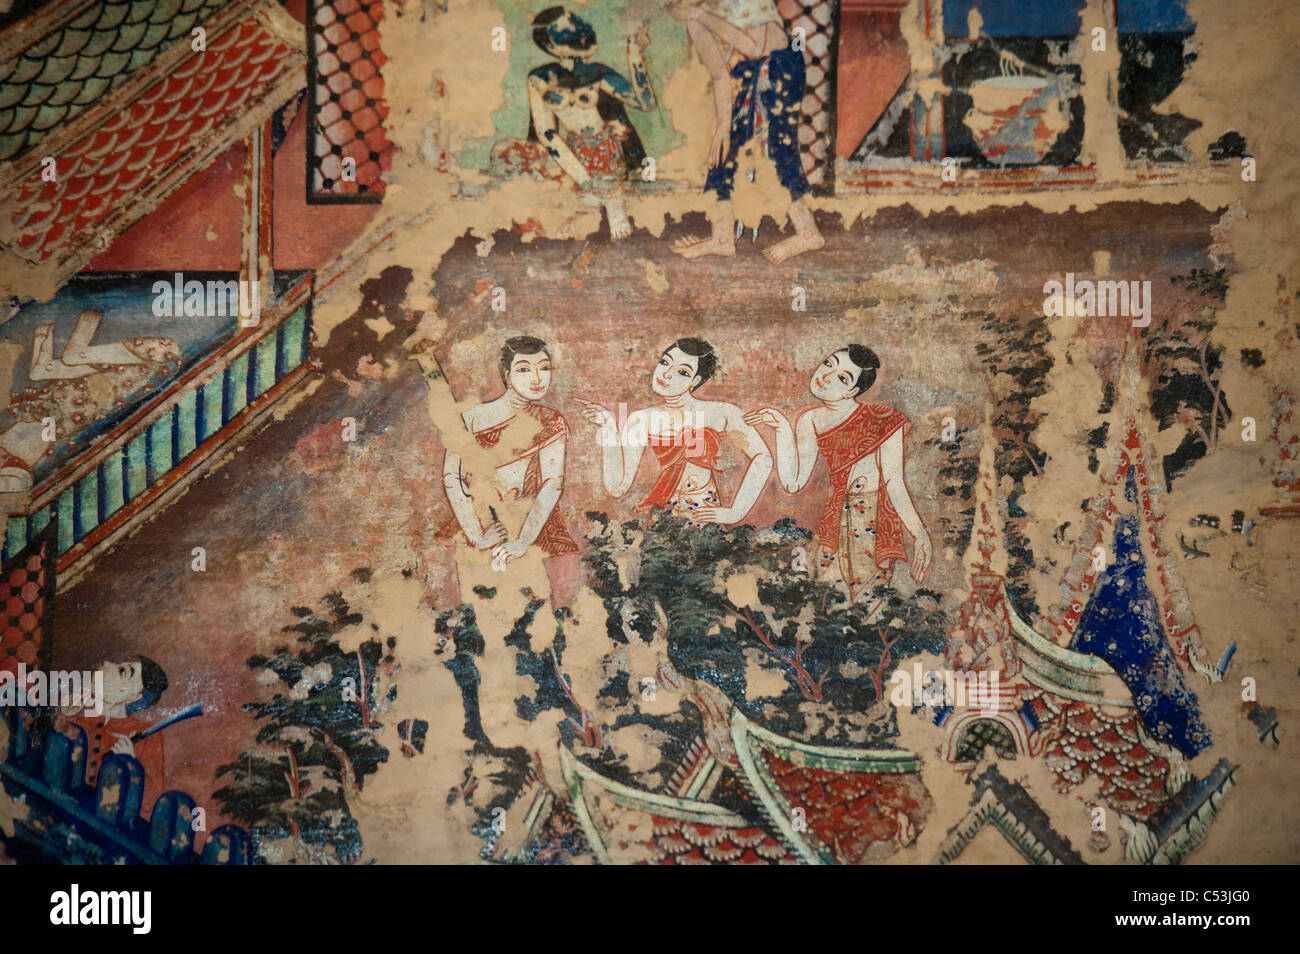 Mural on the wall of Wat Phra Singh, Chiang Mai, Thailand Stock Photo